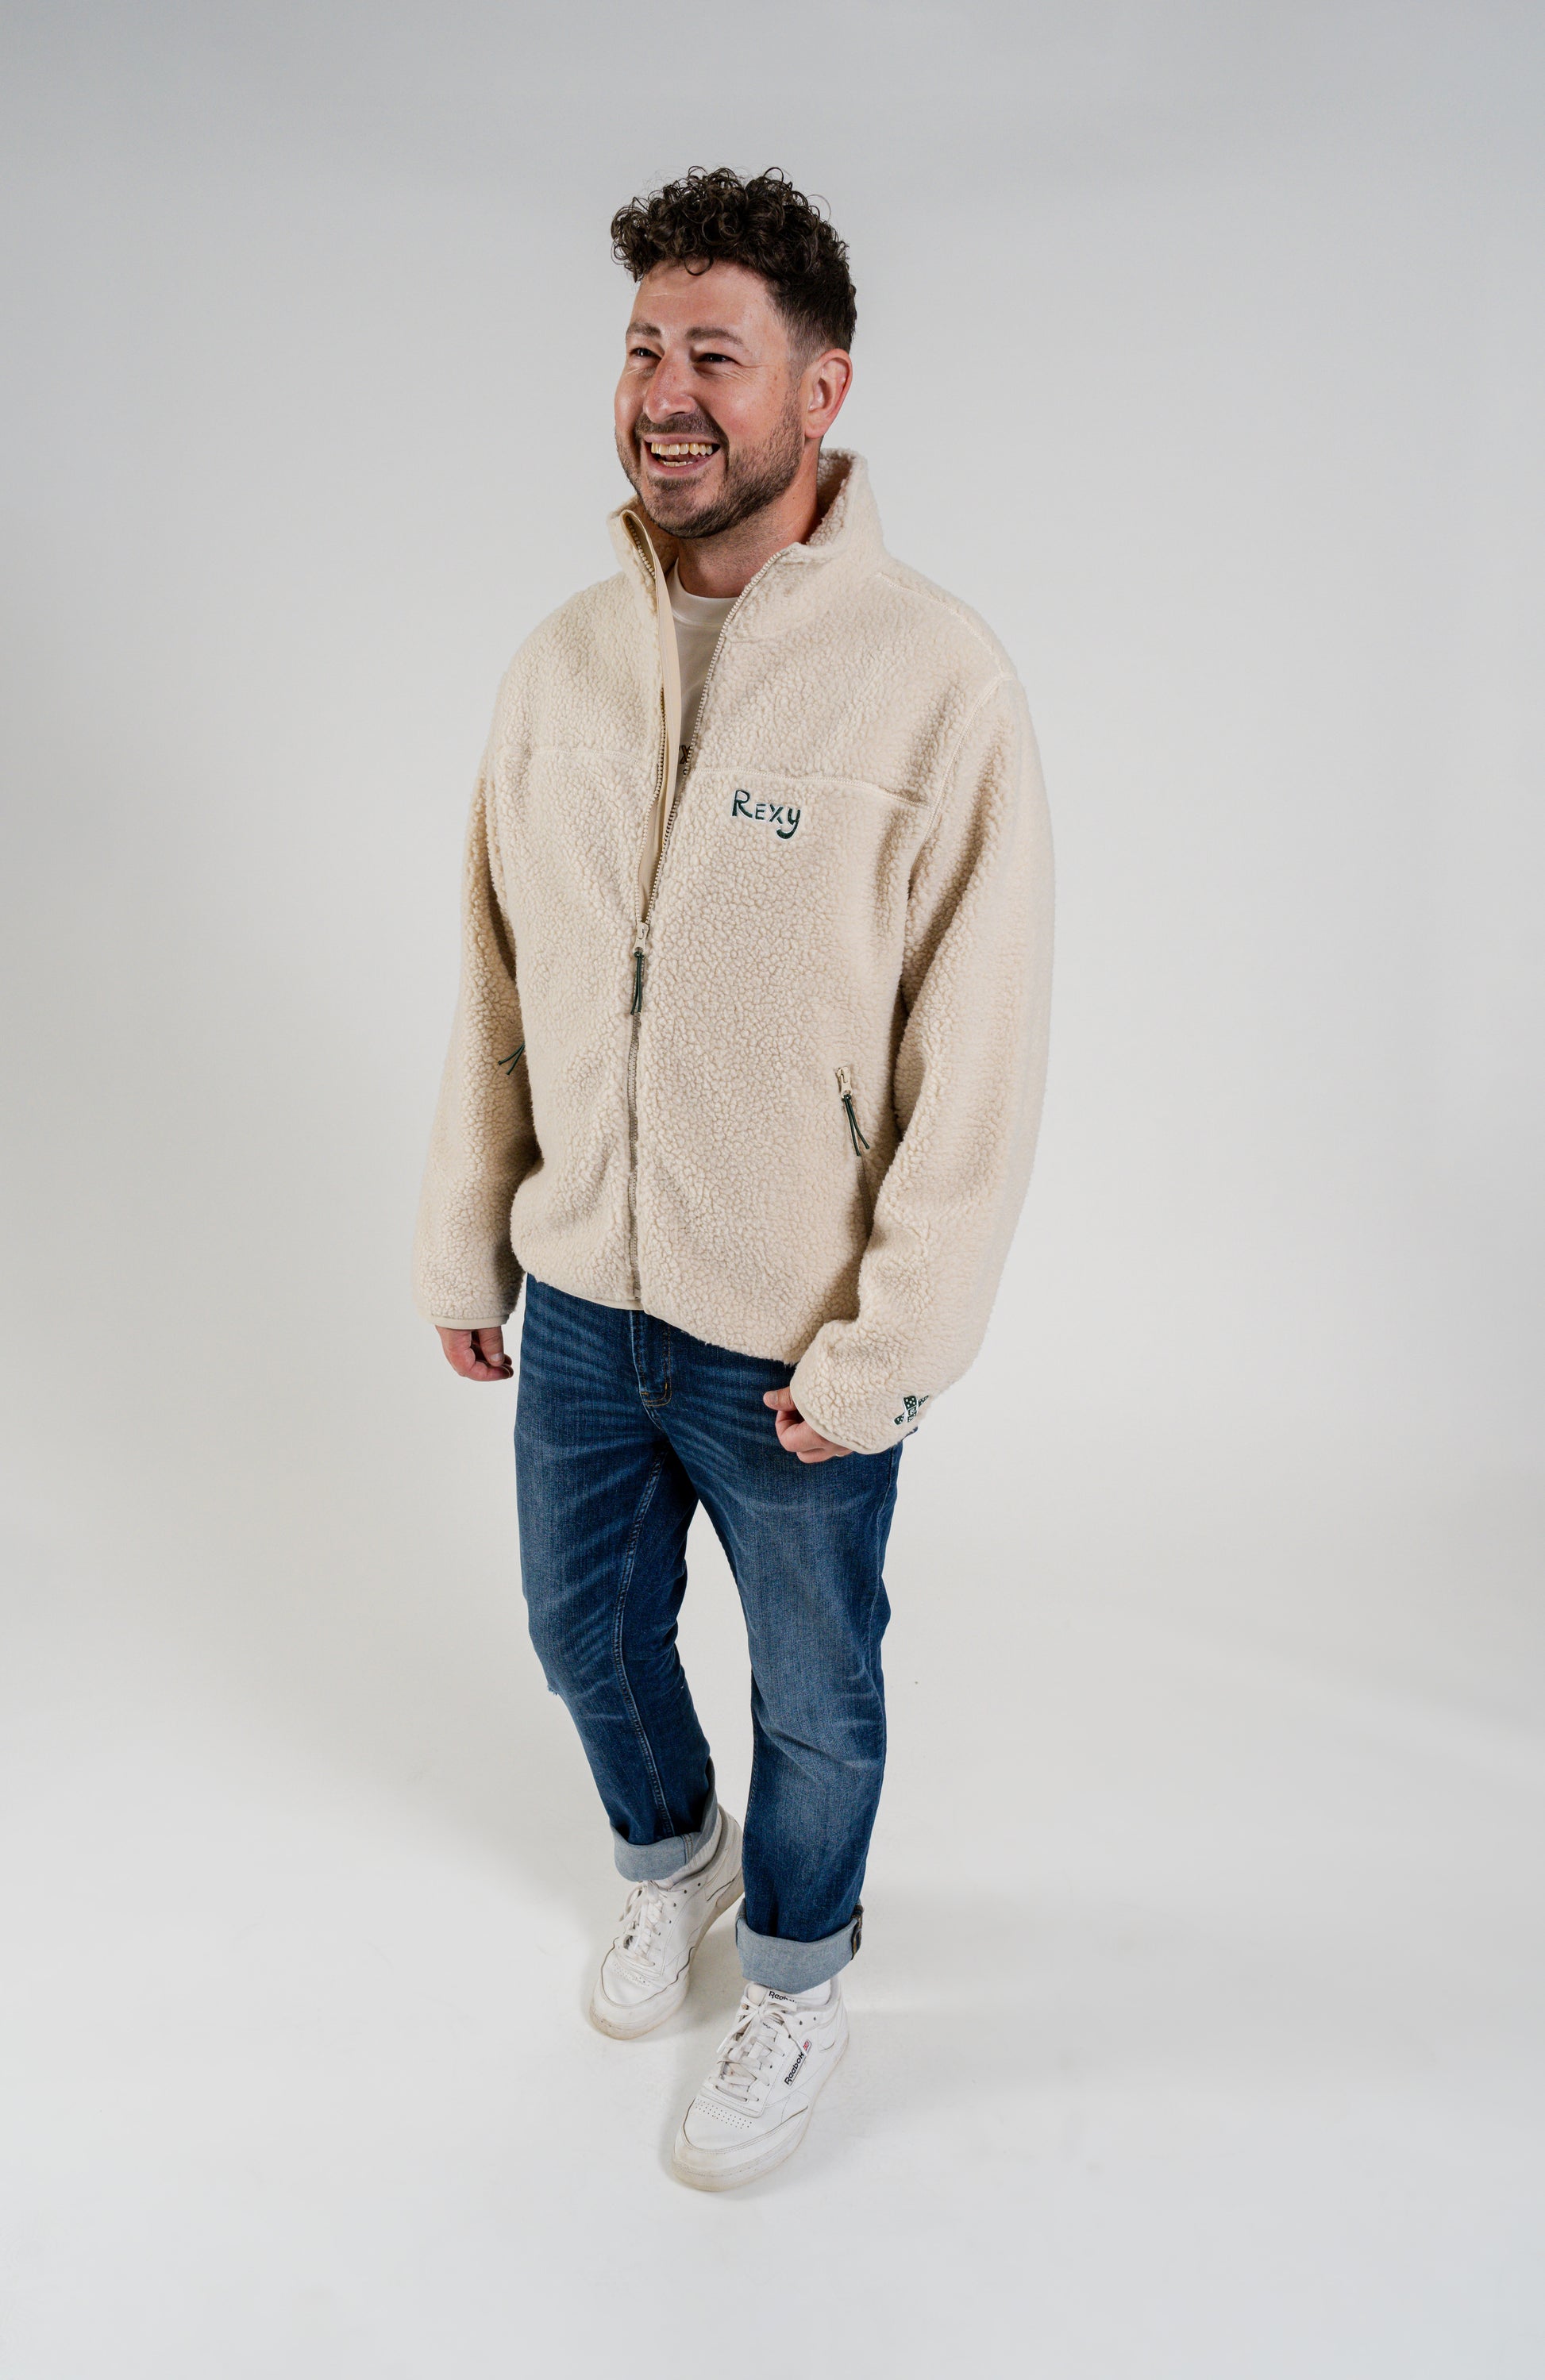 man standing wearing a cream sherpa jacket with rexy embroidery